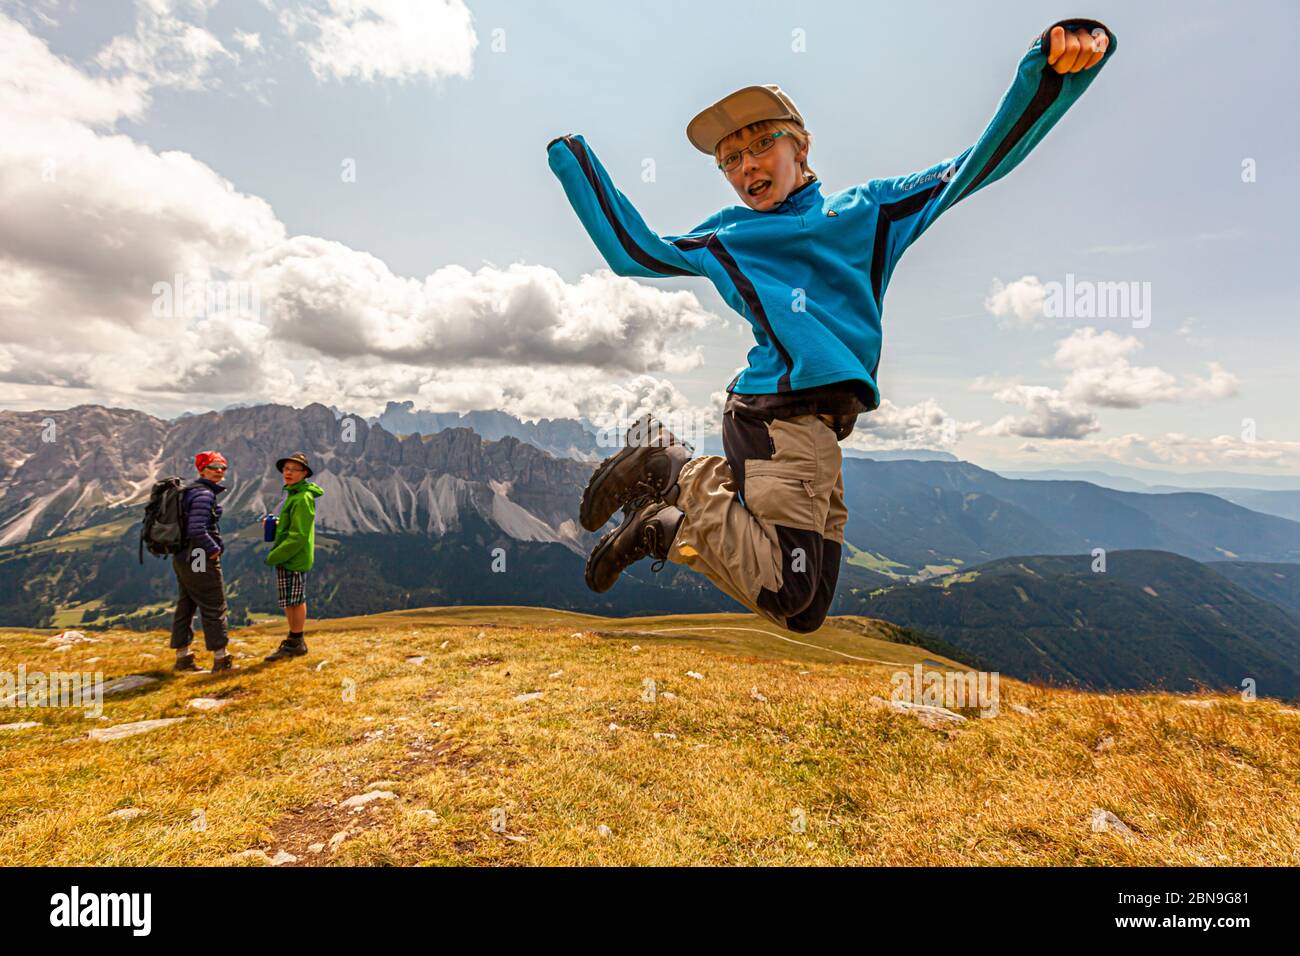 Young Hiker jumping in the Air in the mountains of Alto Adige, Italy Stock Photo